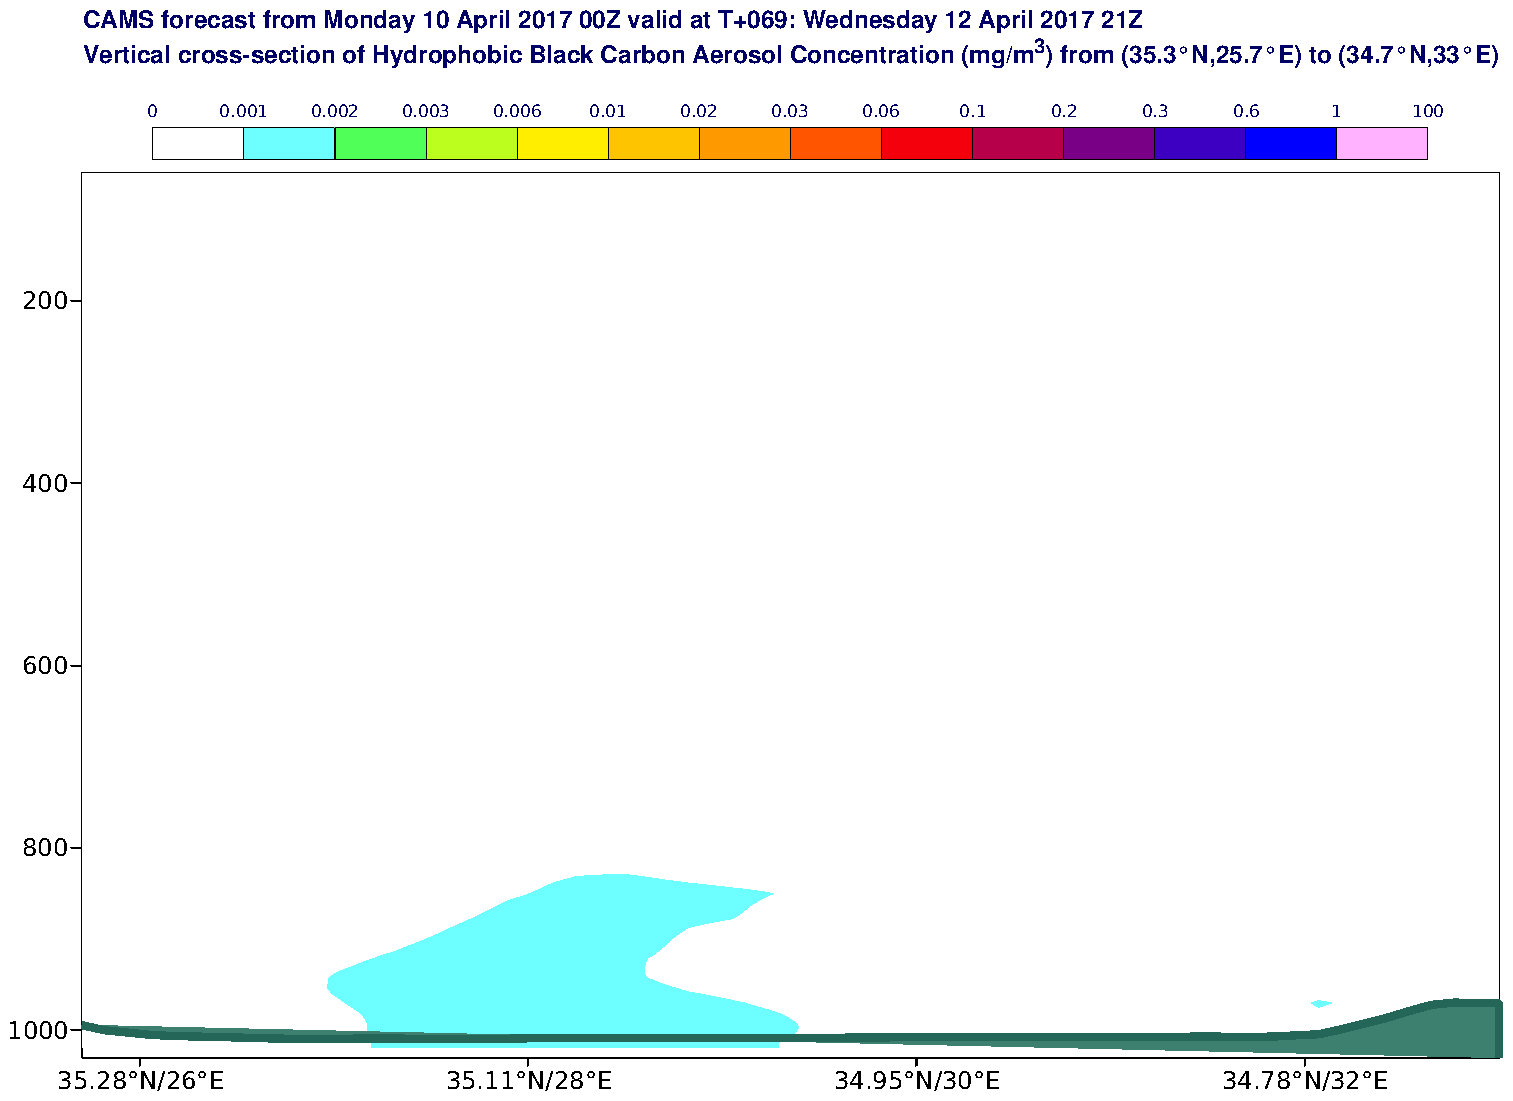 Vertical cross-section of Hydrophobic Black Carbon Aerosol Concentration (mg/m3) valid at T69 - 2017-04-12 21:00